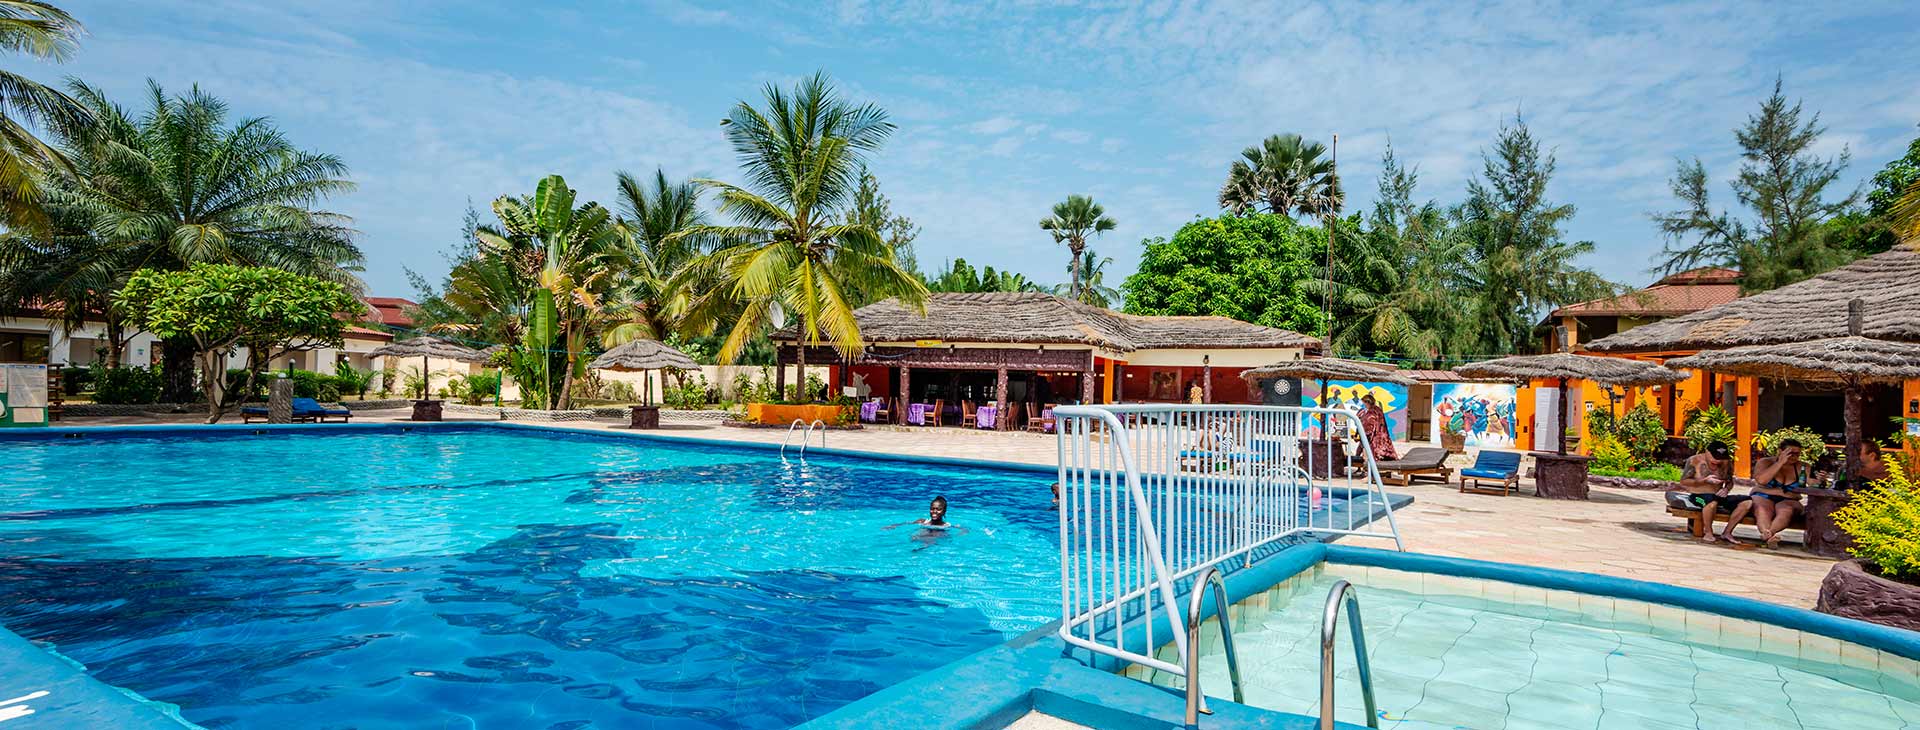 Holiday Beach Club Gambia Bandżul » opis oferty » Fly.pl